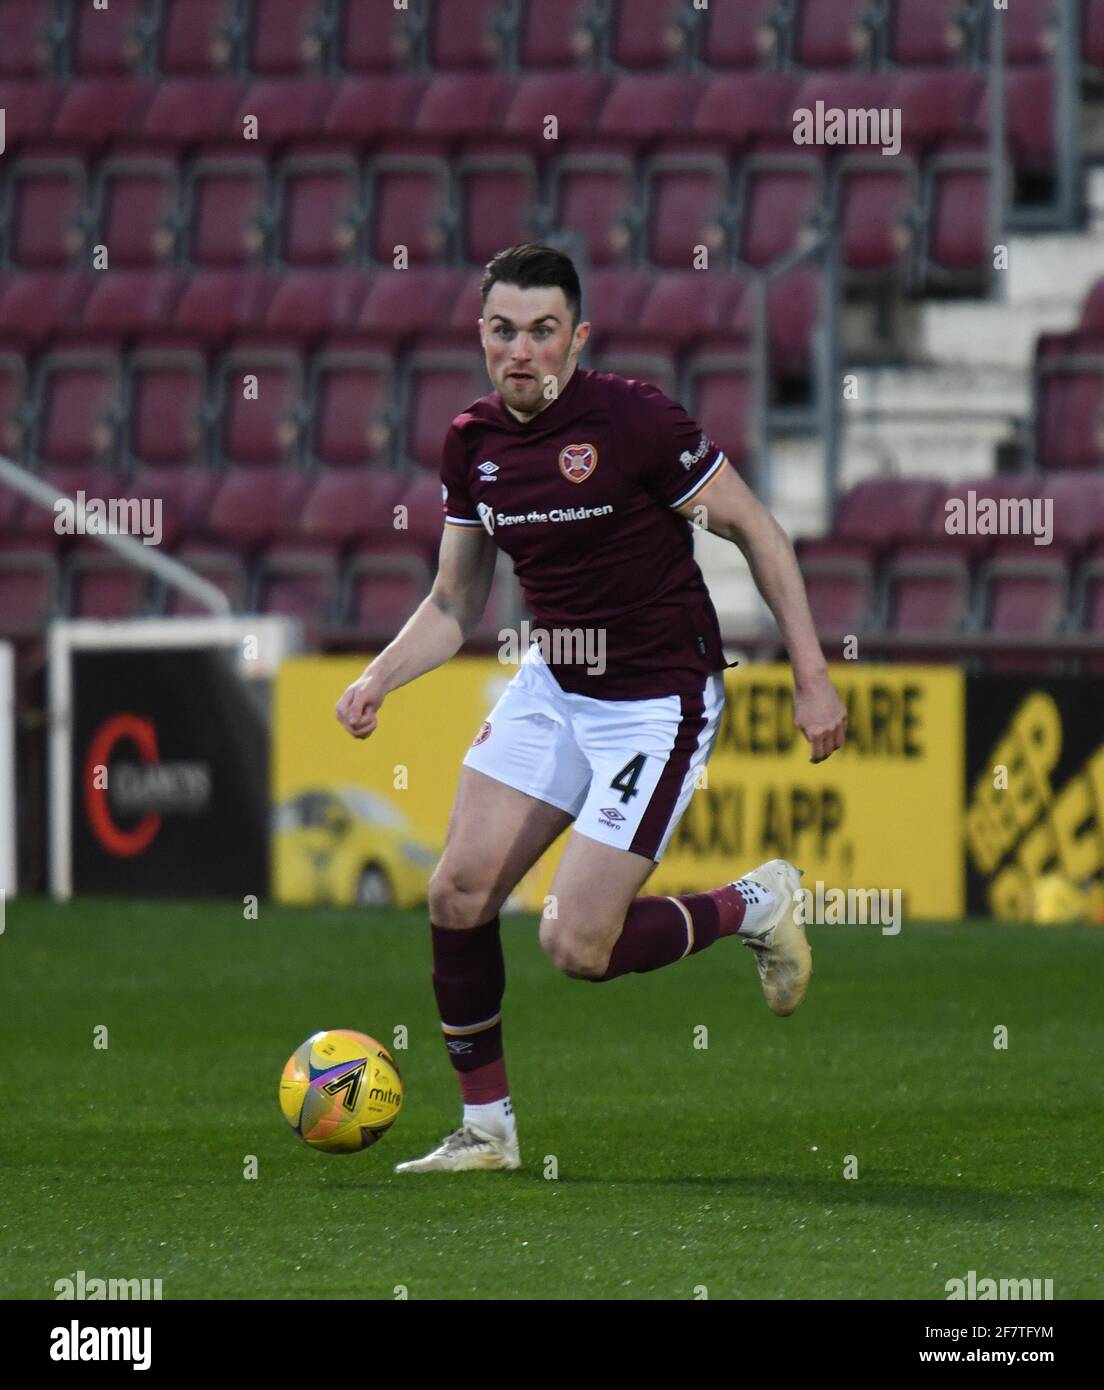 Tynecastle Park, Edinburgh, Scotland. UK. 9th April 21. Scottish Championship Match.Hearts vs Alloa Hearts welcome the return of John Souttar after being out with a long term injury Credit: eric mccowat/Alamy Live News Stock Photo